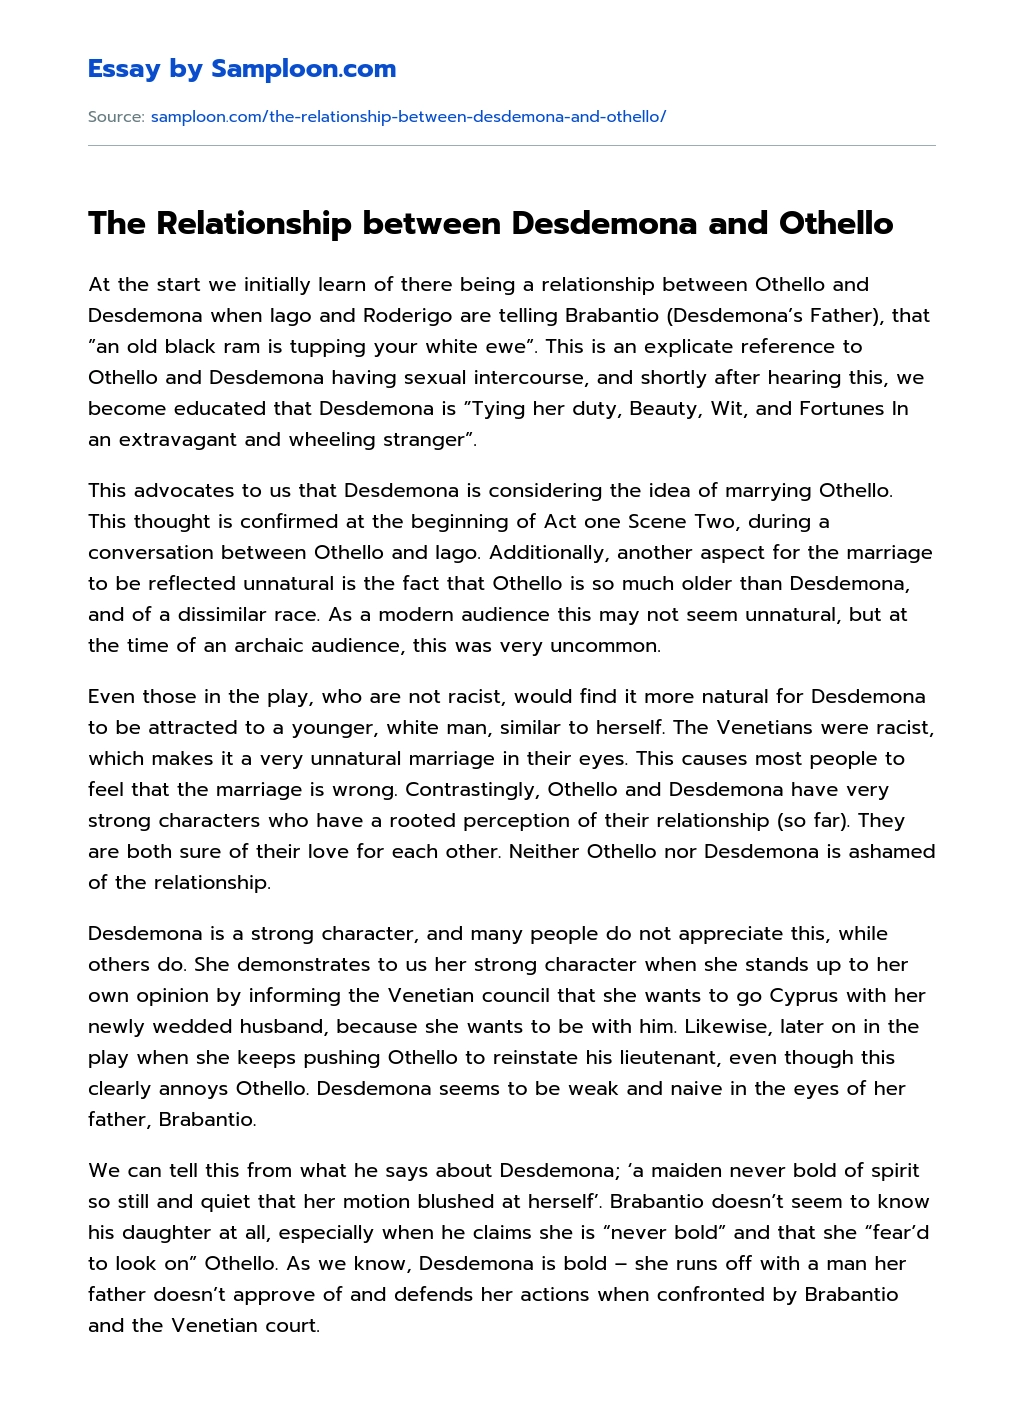 The Relationship between Desdemona and Othello essay